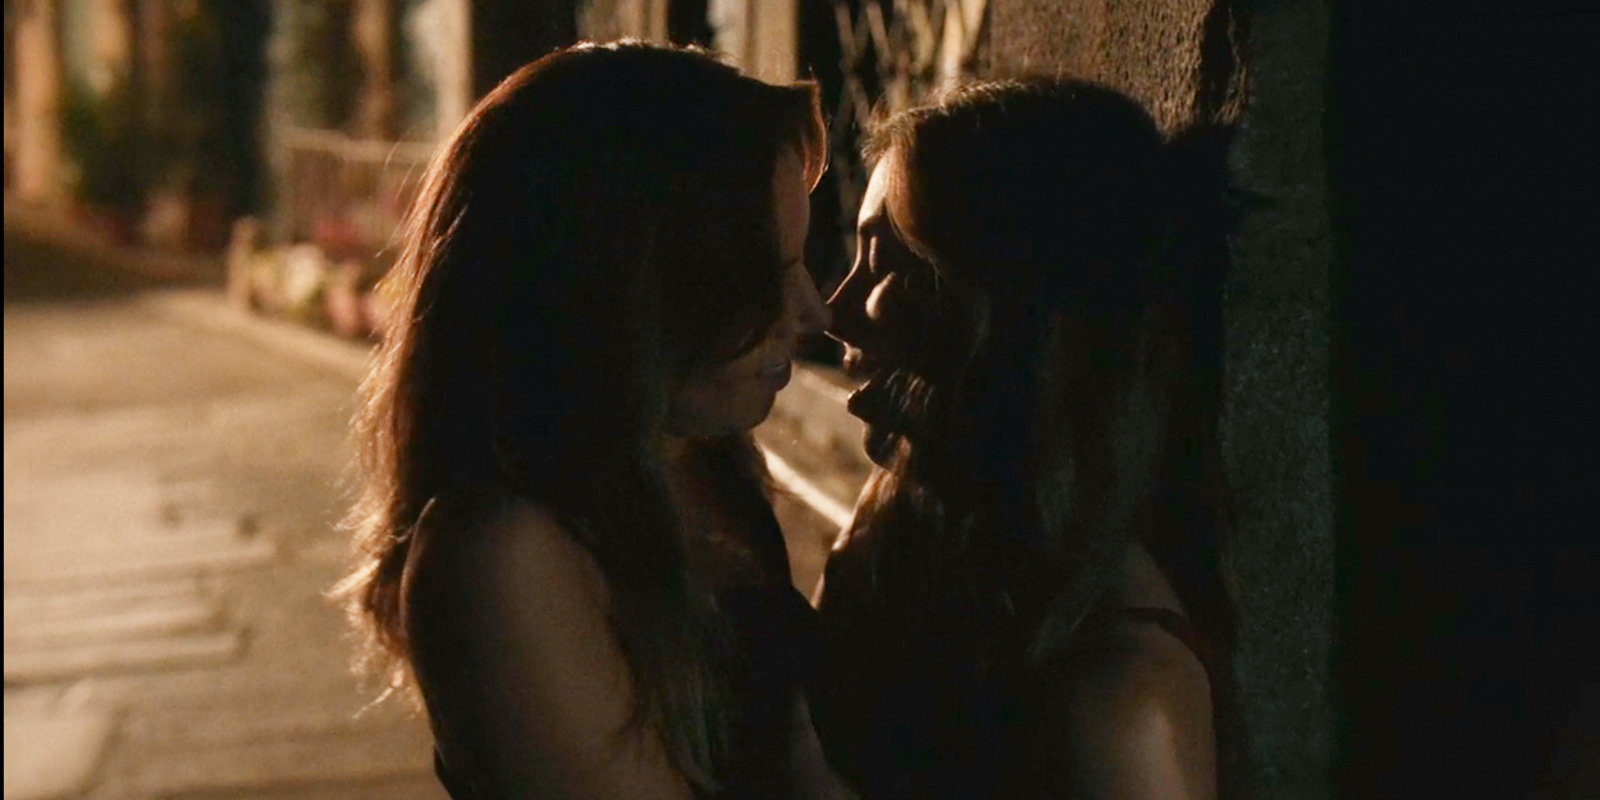 Aubrey Plaza and Allison Brie kissing in Spin Me Round